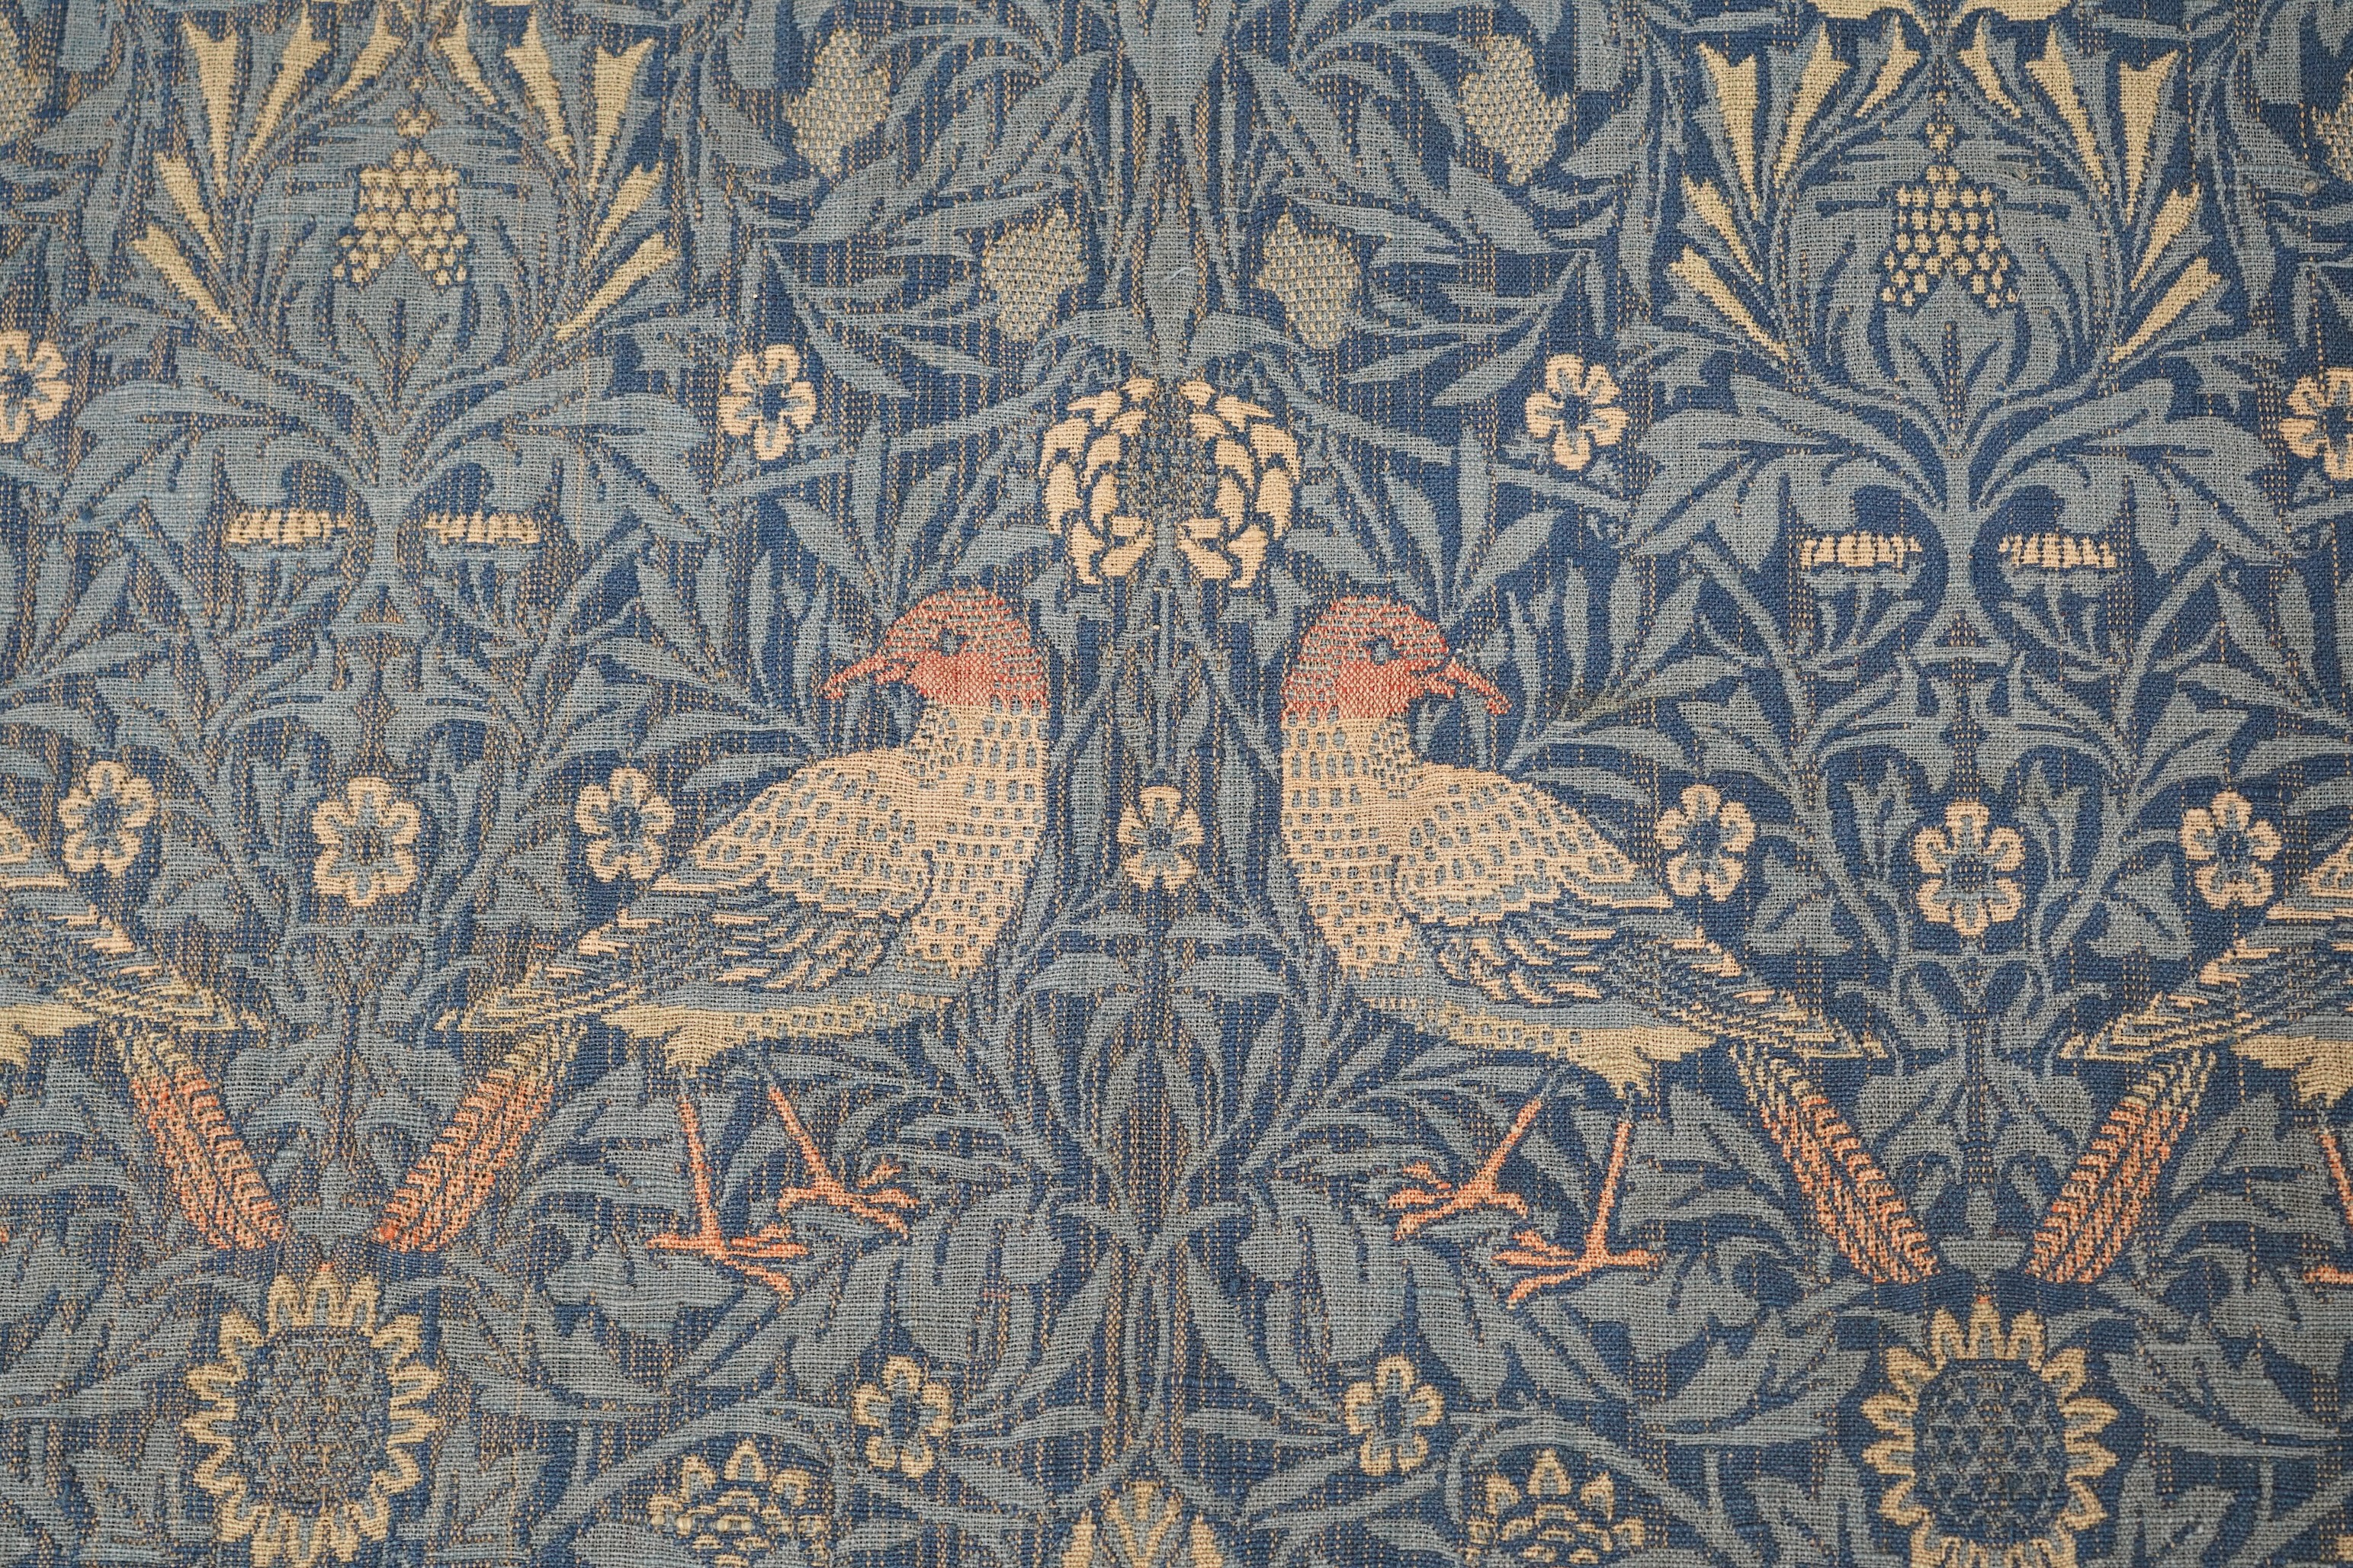 A later sample panel of William Morris ‘Bird’ design, jacquard-woven woollen double cloth, furnishing fabric. Originally manufactured in 1877-1888 by Merton Abbey Workshop for Morris &Co. 91cm x 71cm                     